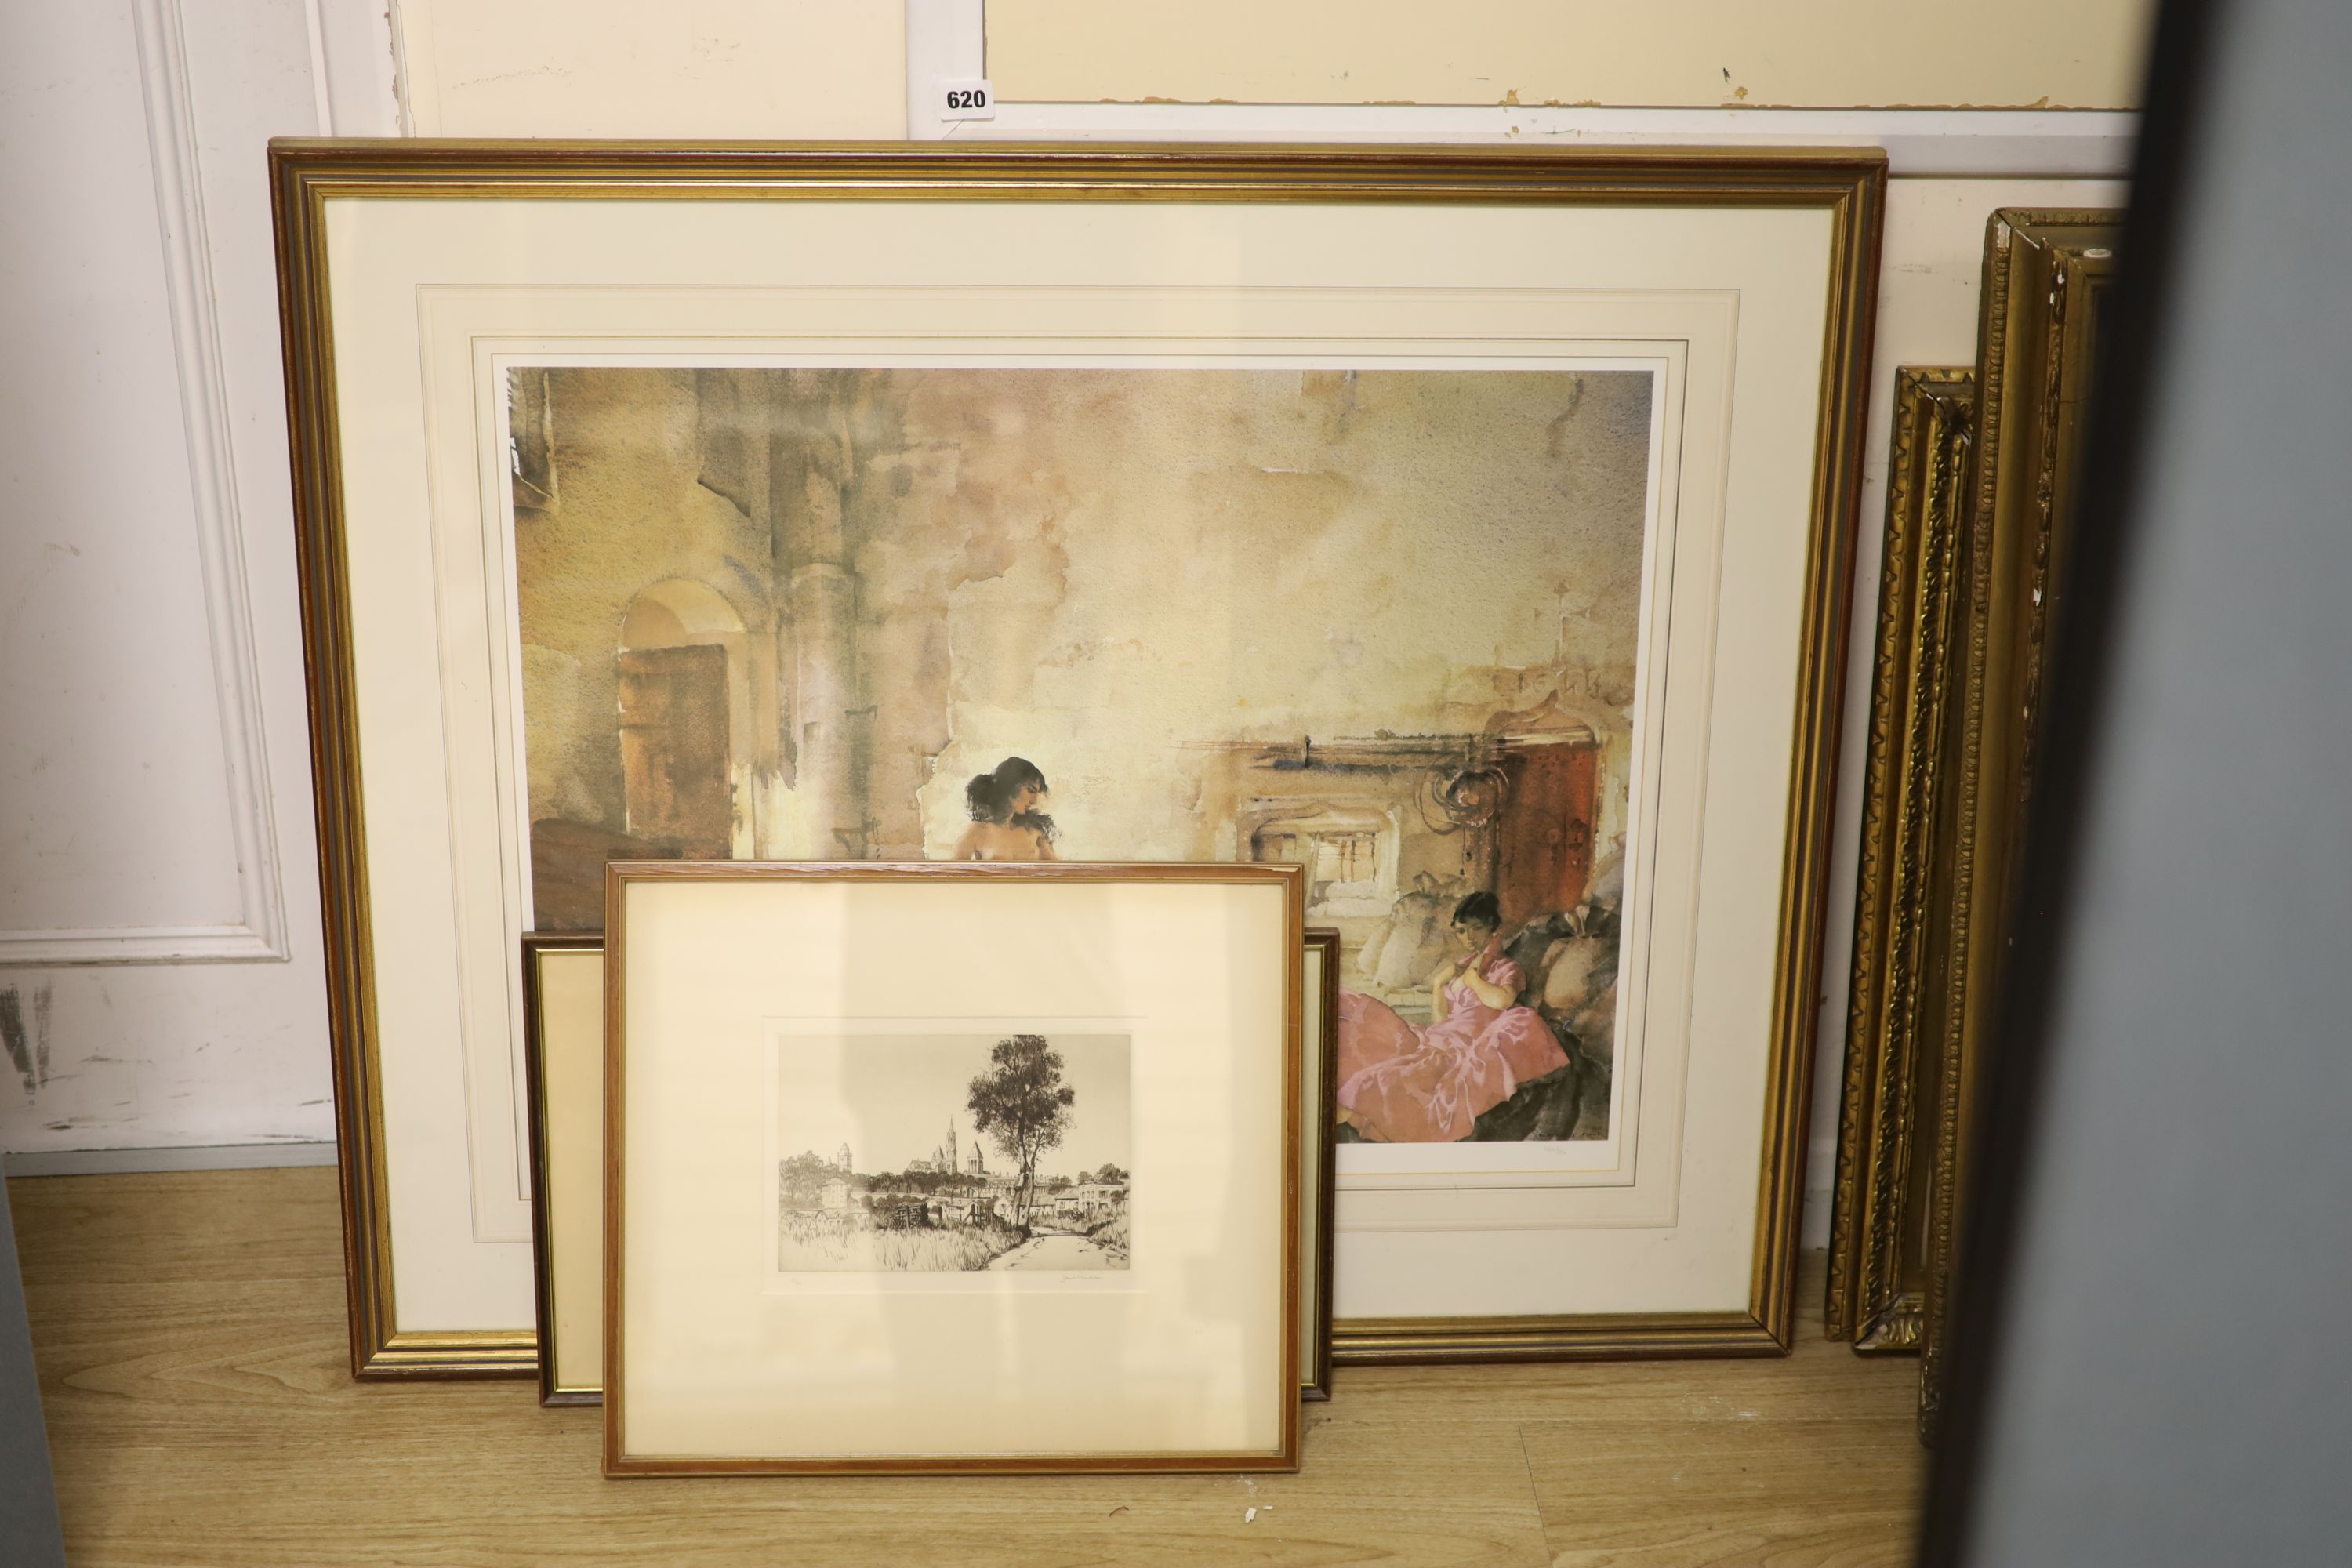 Sir William Russell Flint, limited edition print, Interior with models, 363/850, 52 x 68cm, two other Flint prints and an etching by Samuel Chamberlain